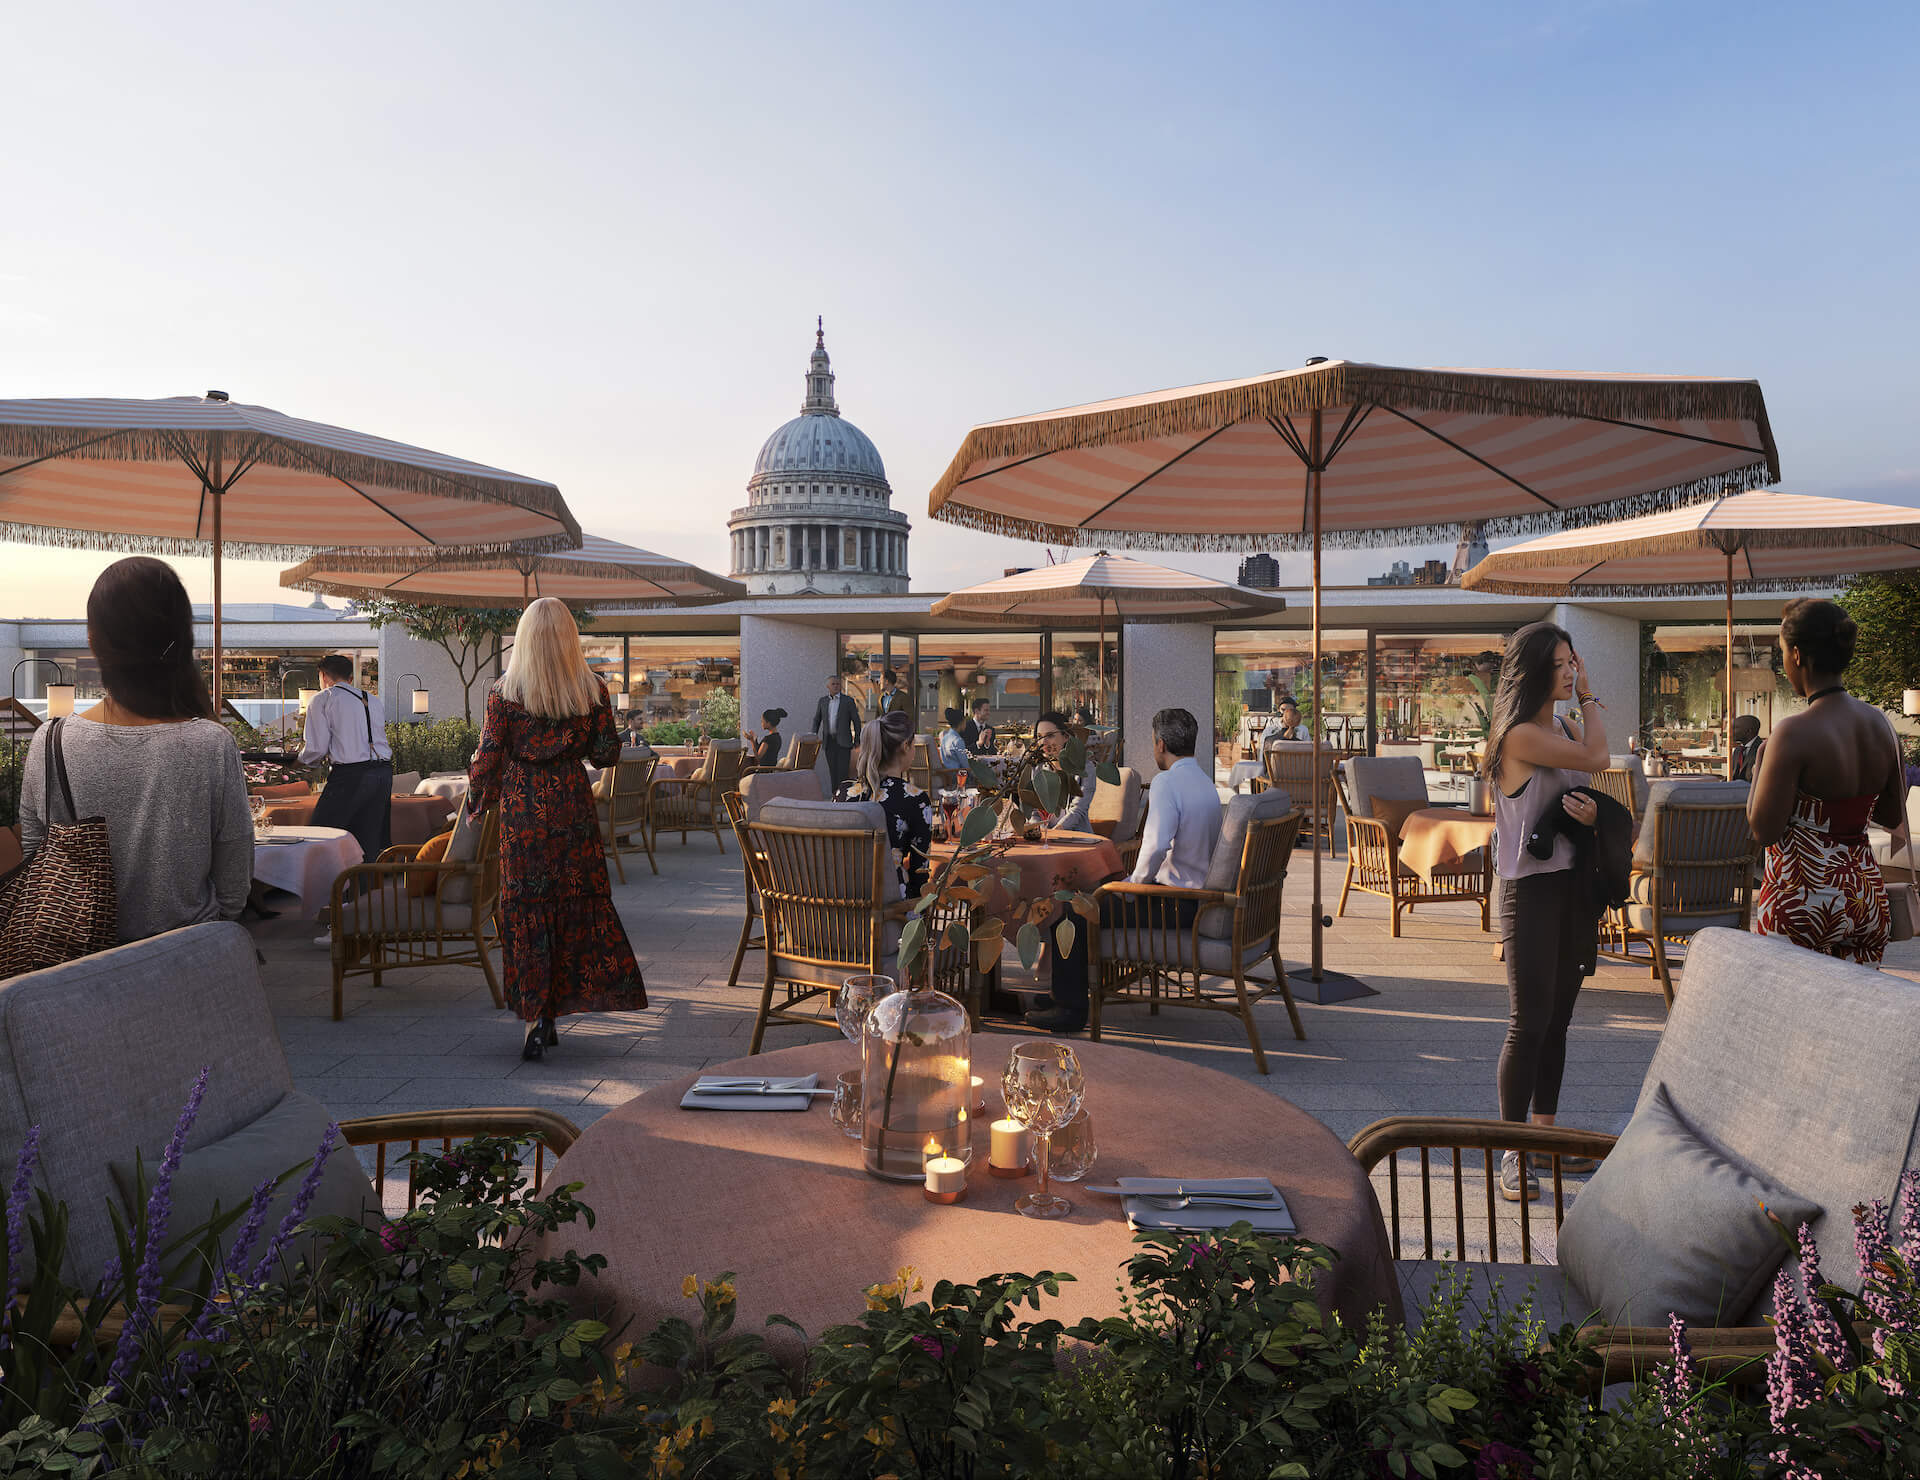 An indicative view of the roof terrace restaurant